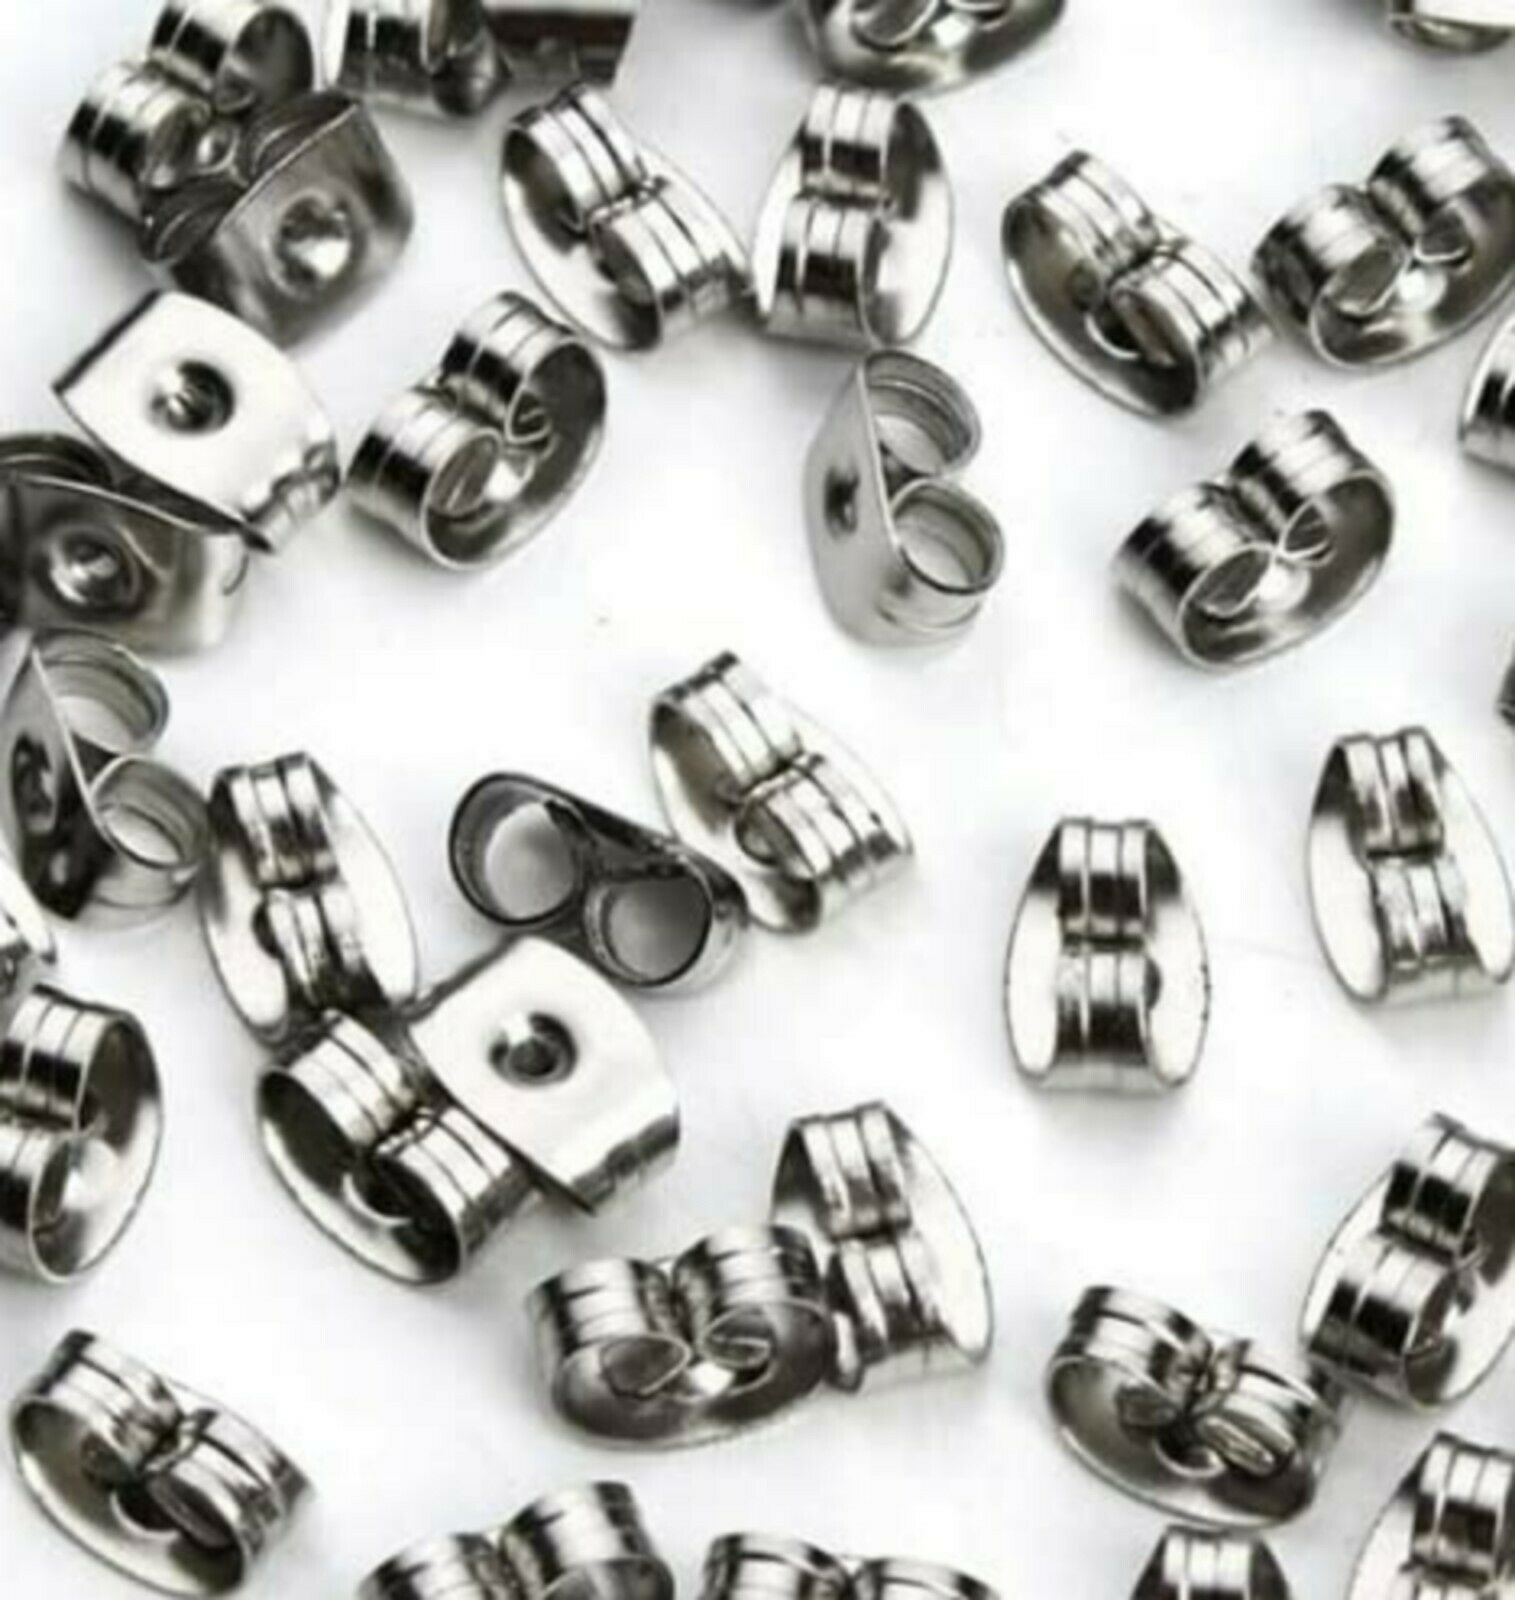 20 Earring Backs Stainless Steel Butterfly 6mm Replacement Set Craft Bulk Lot